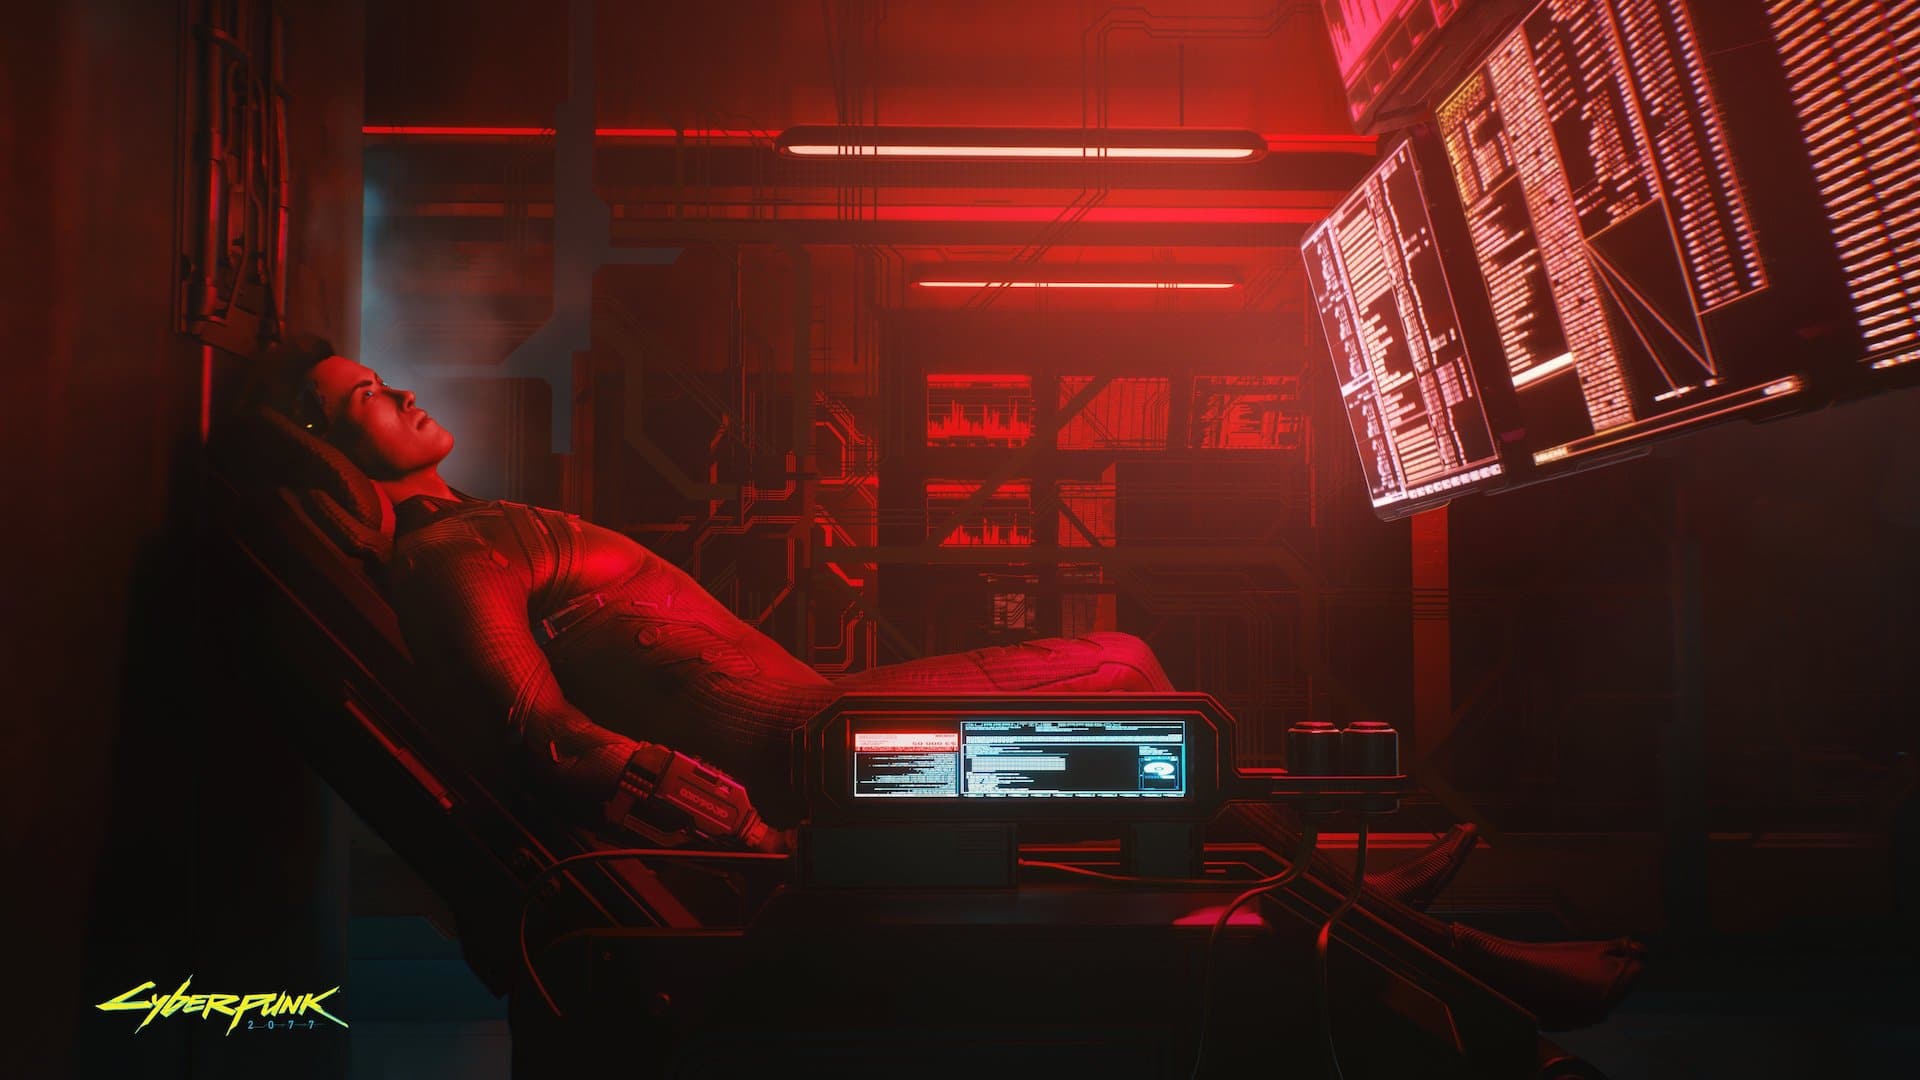 Early Reviews Claim Cyberpunk 2077 “Riddled With Bugs”